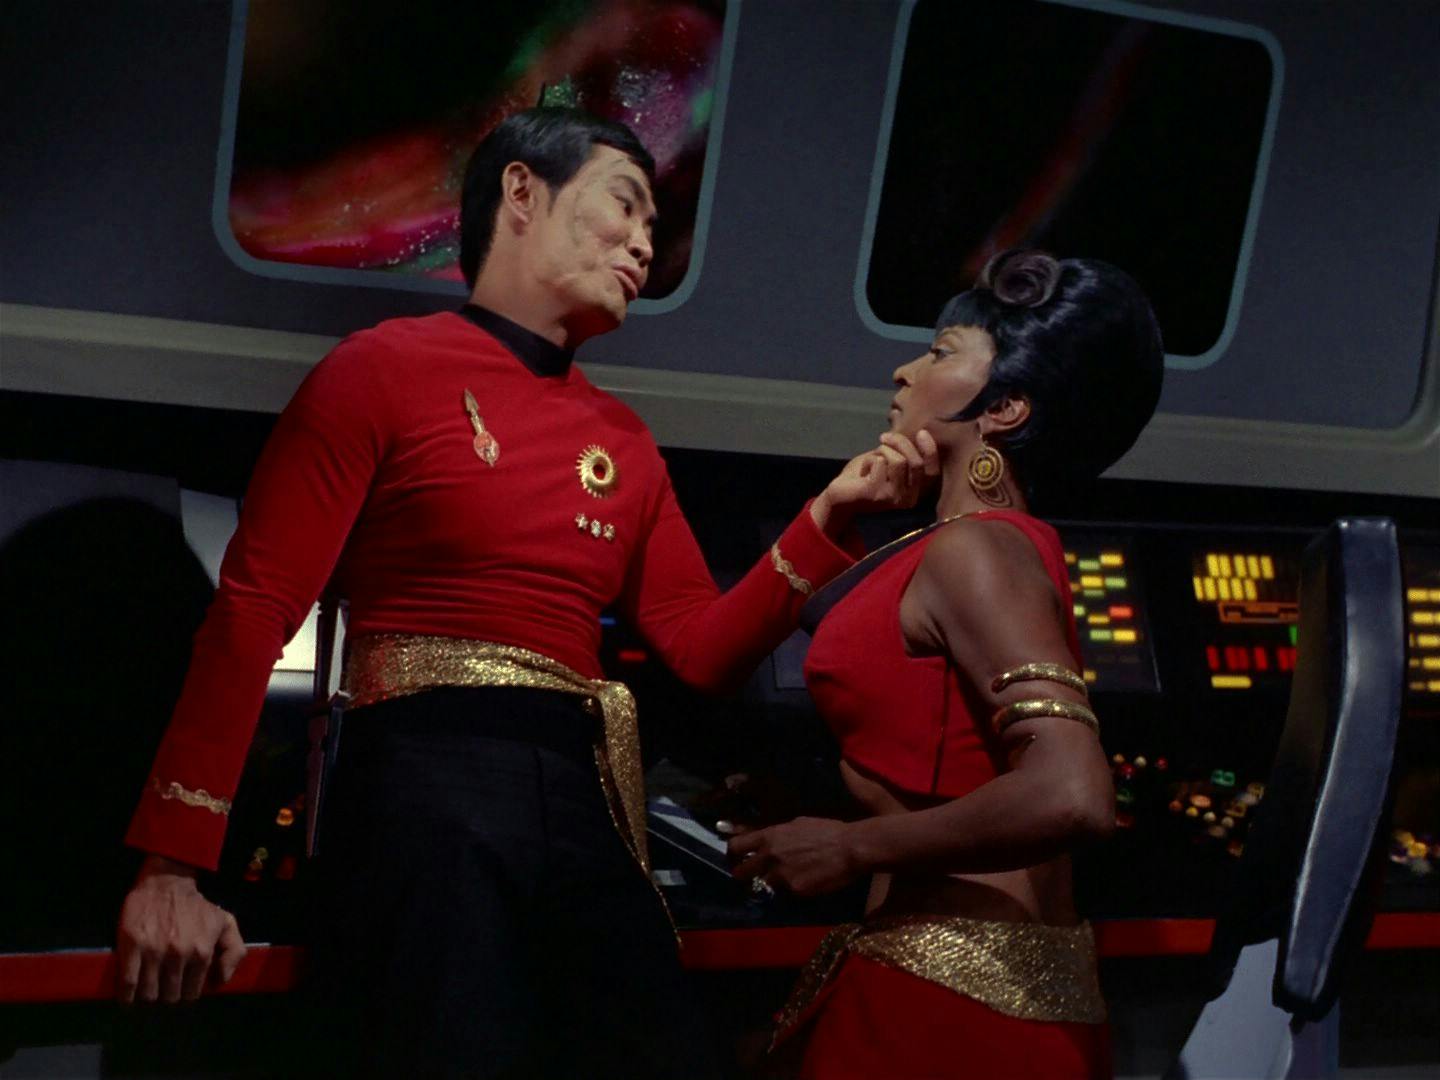 Mirror Sulu takes Mirror Uhura's face into his hand as he leans against her console